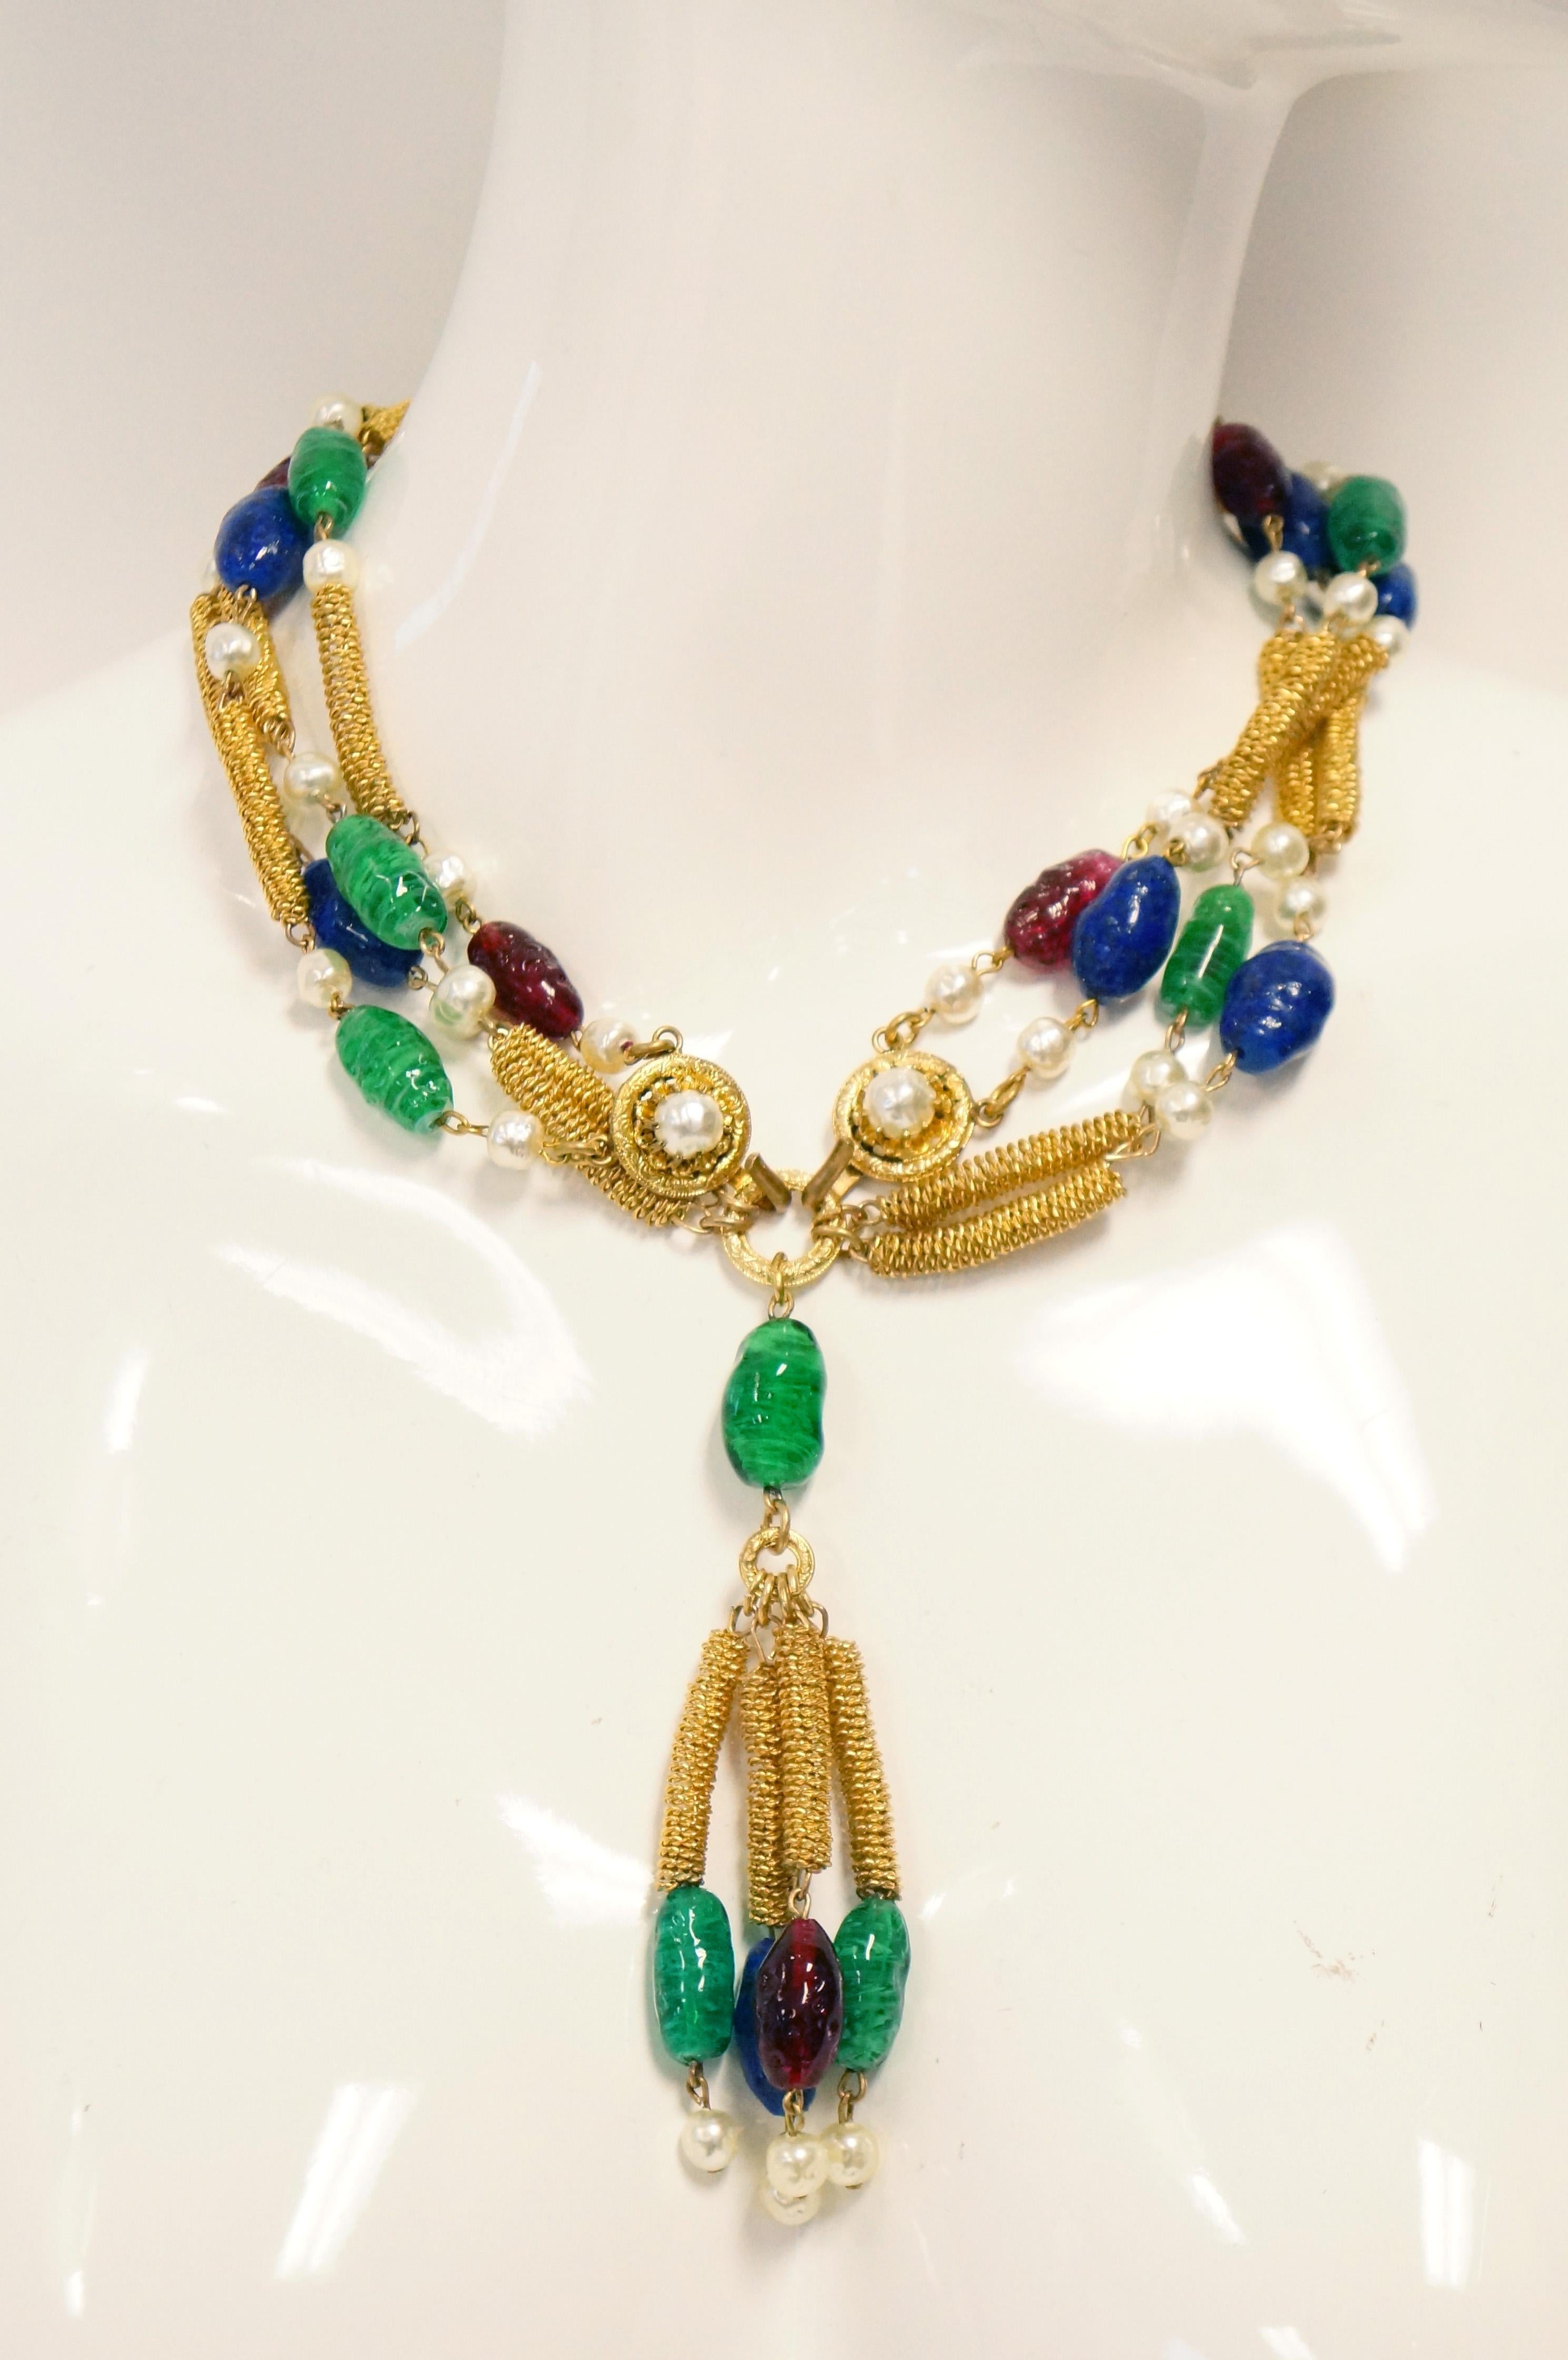  1960’s Chanel Gripoix Four Strand Necklace with Tassel Drop 2